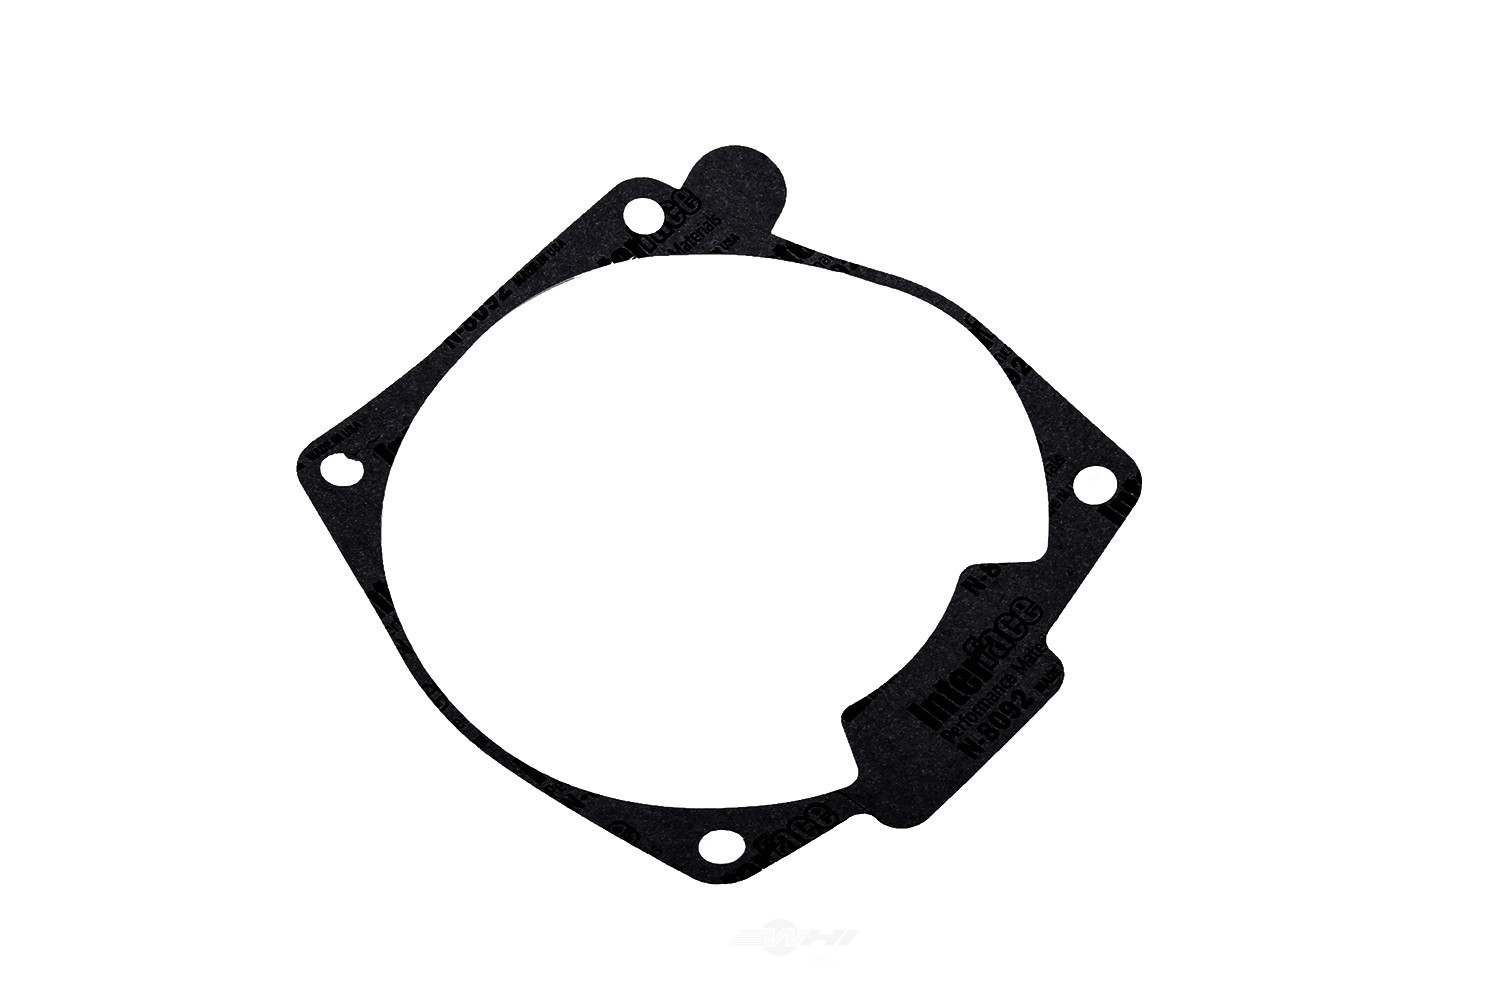 GM GENUINE PARTS - Axle Housing Cover Gasket - GMP 15864790